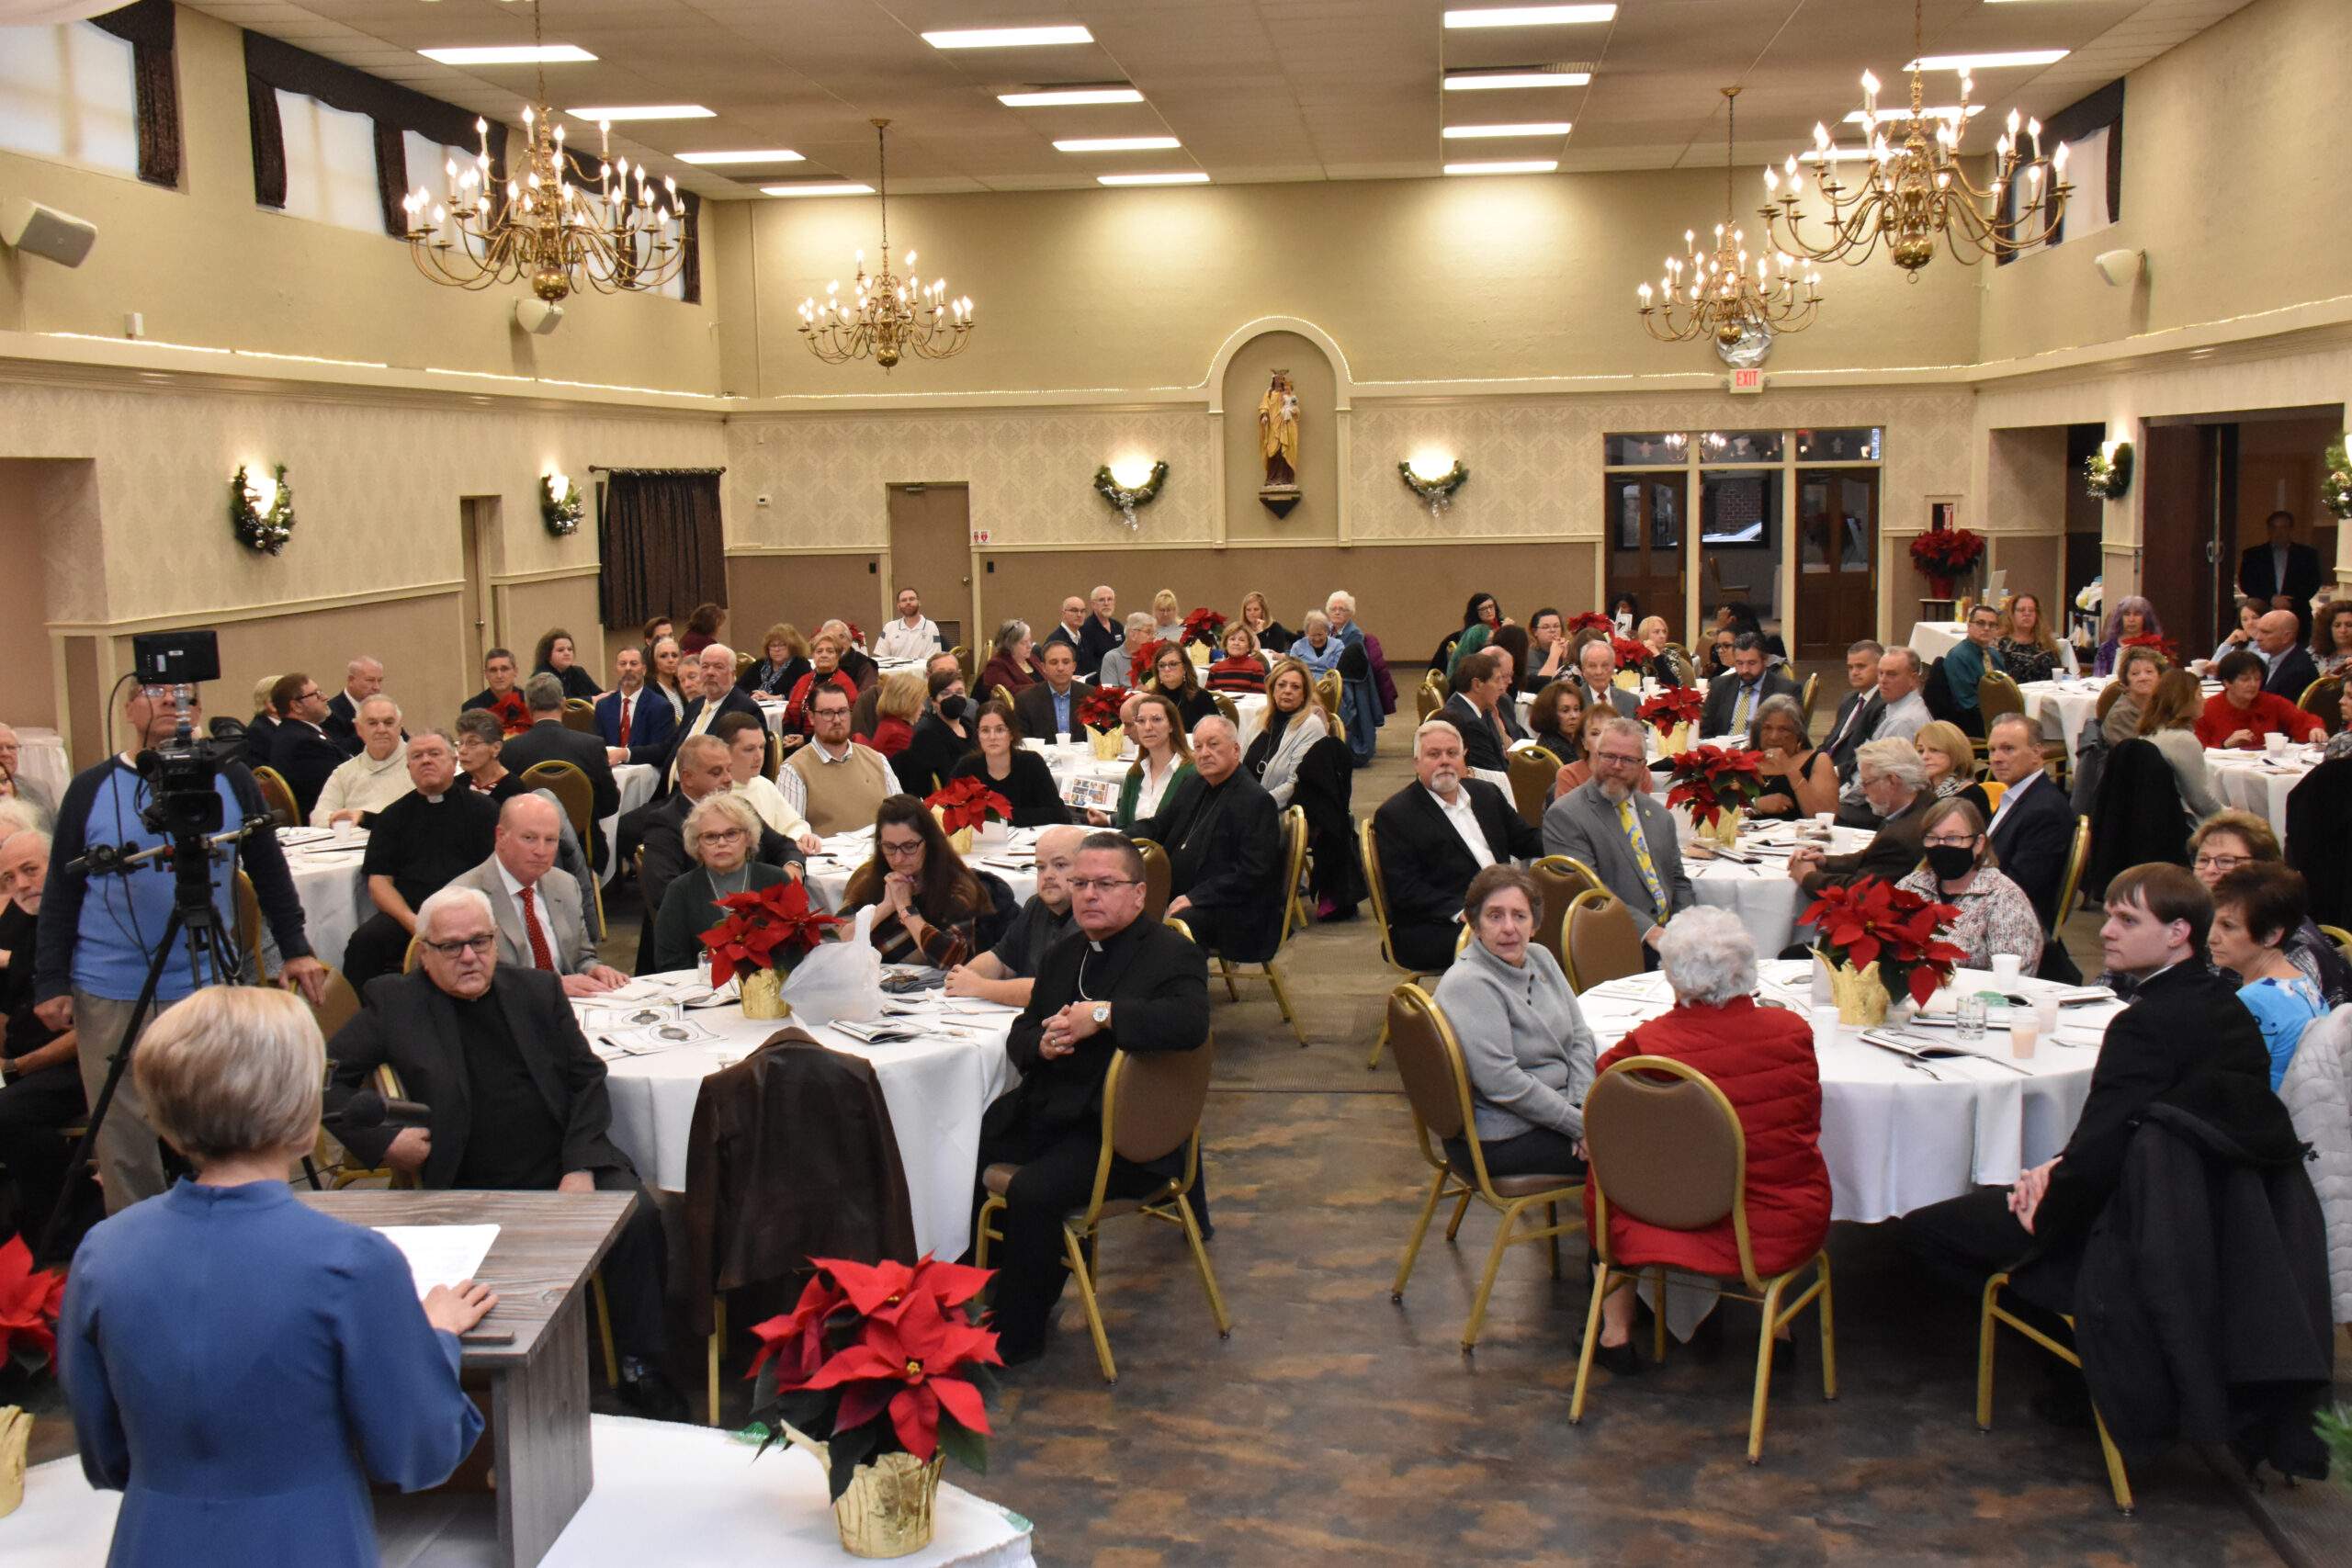 159 guests sit at tables decorated with Poinsettias, in Our Lady of Mt. Carmel Hall, Youngstown.